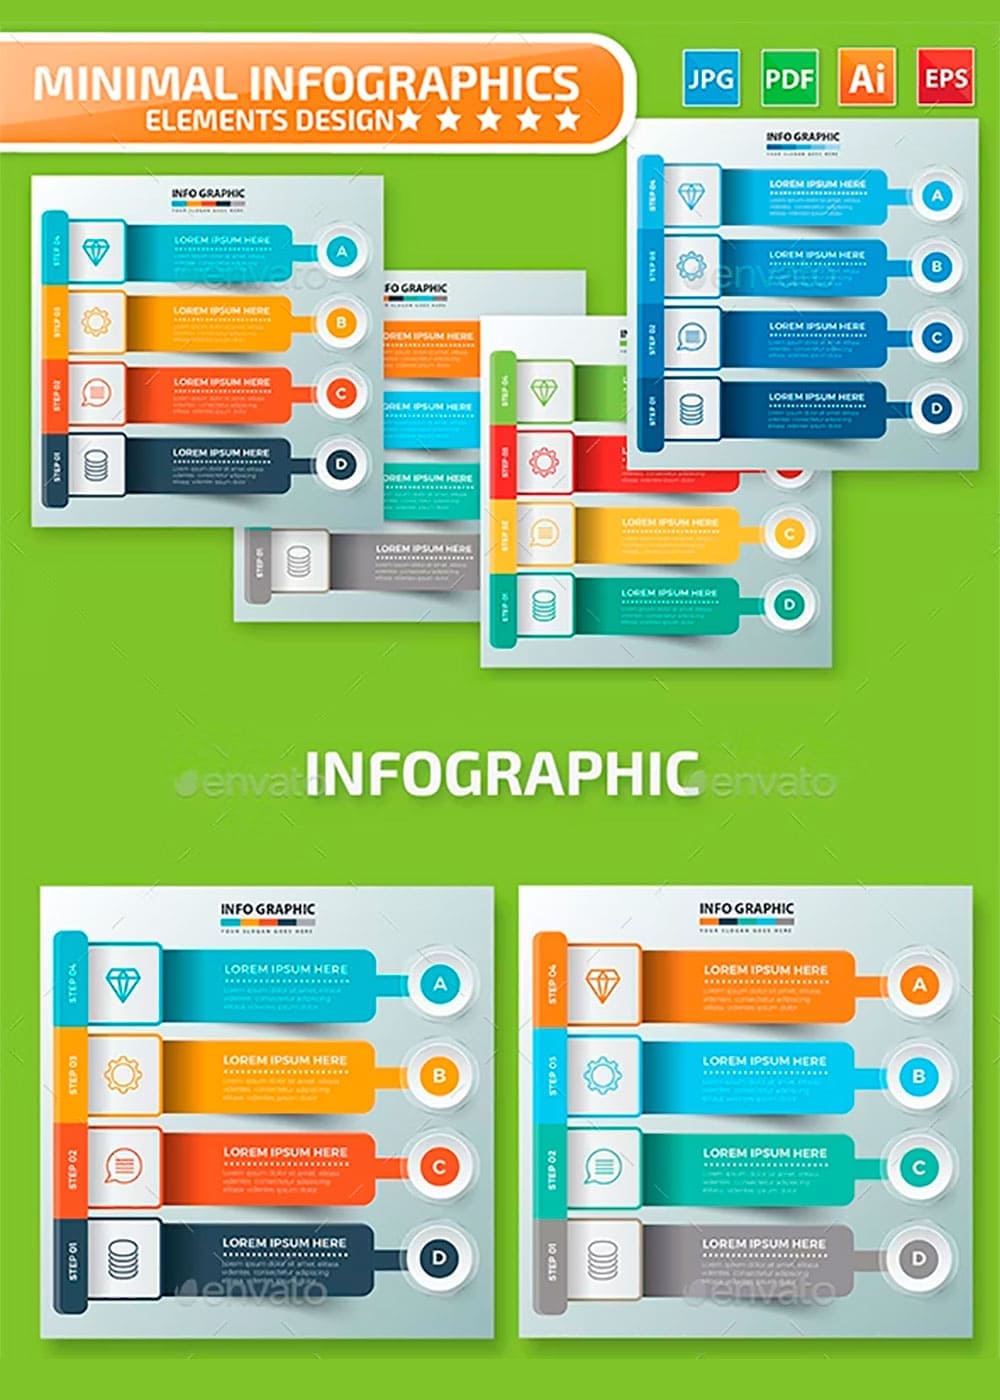 Infographic design in the green screen, picture for pinterest.